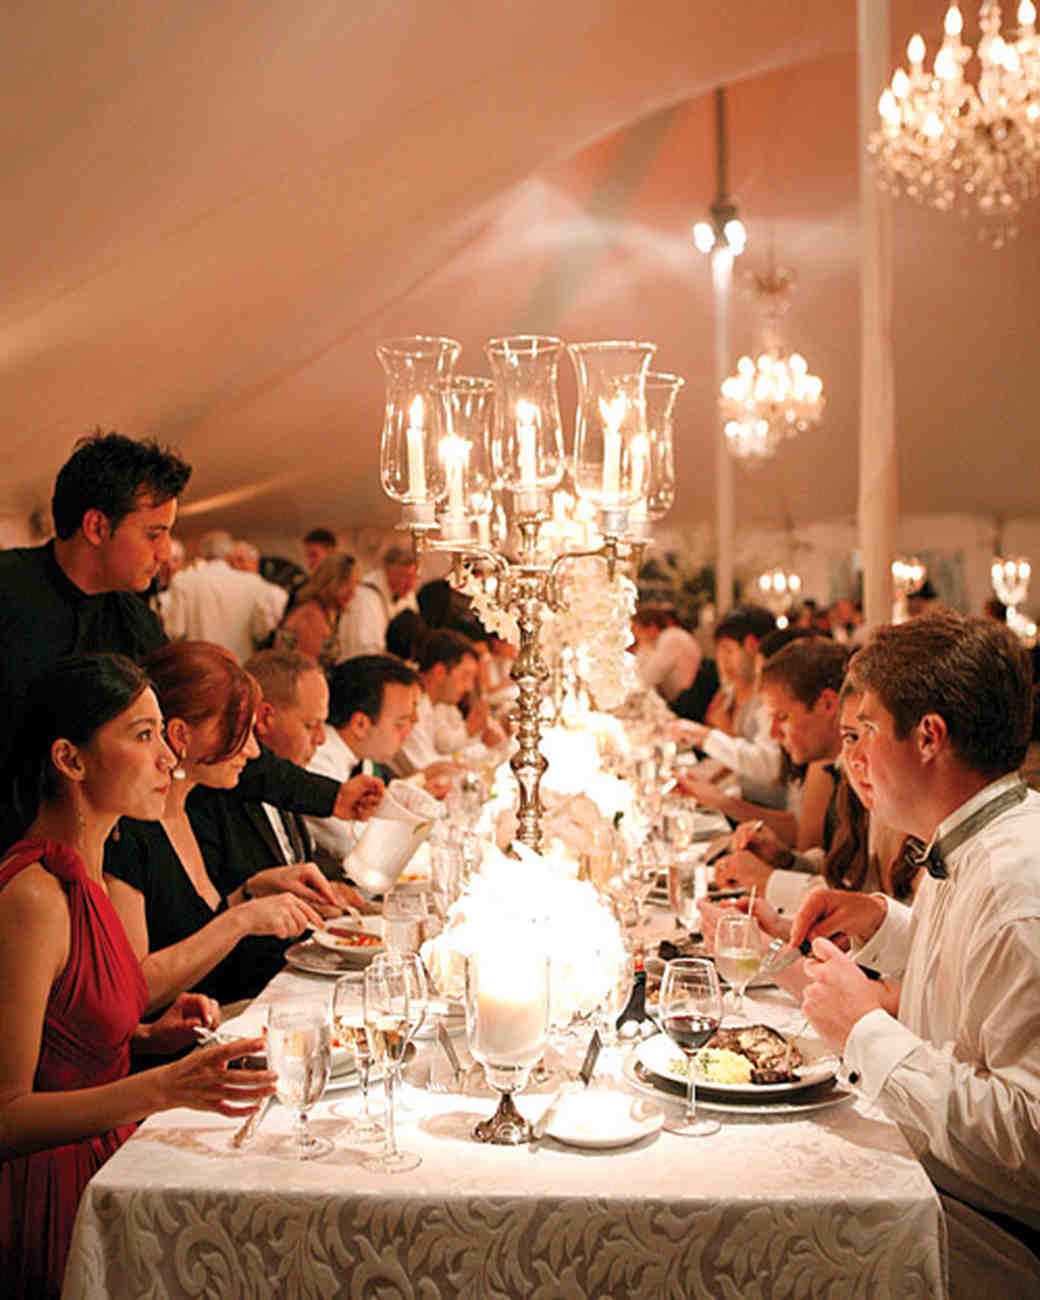 Is there a seating protocol for a wedding rehearsal dinner?